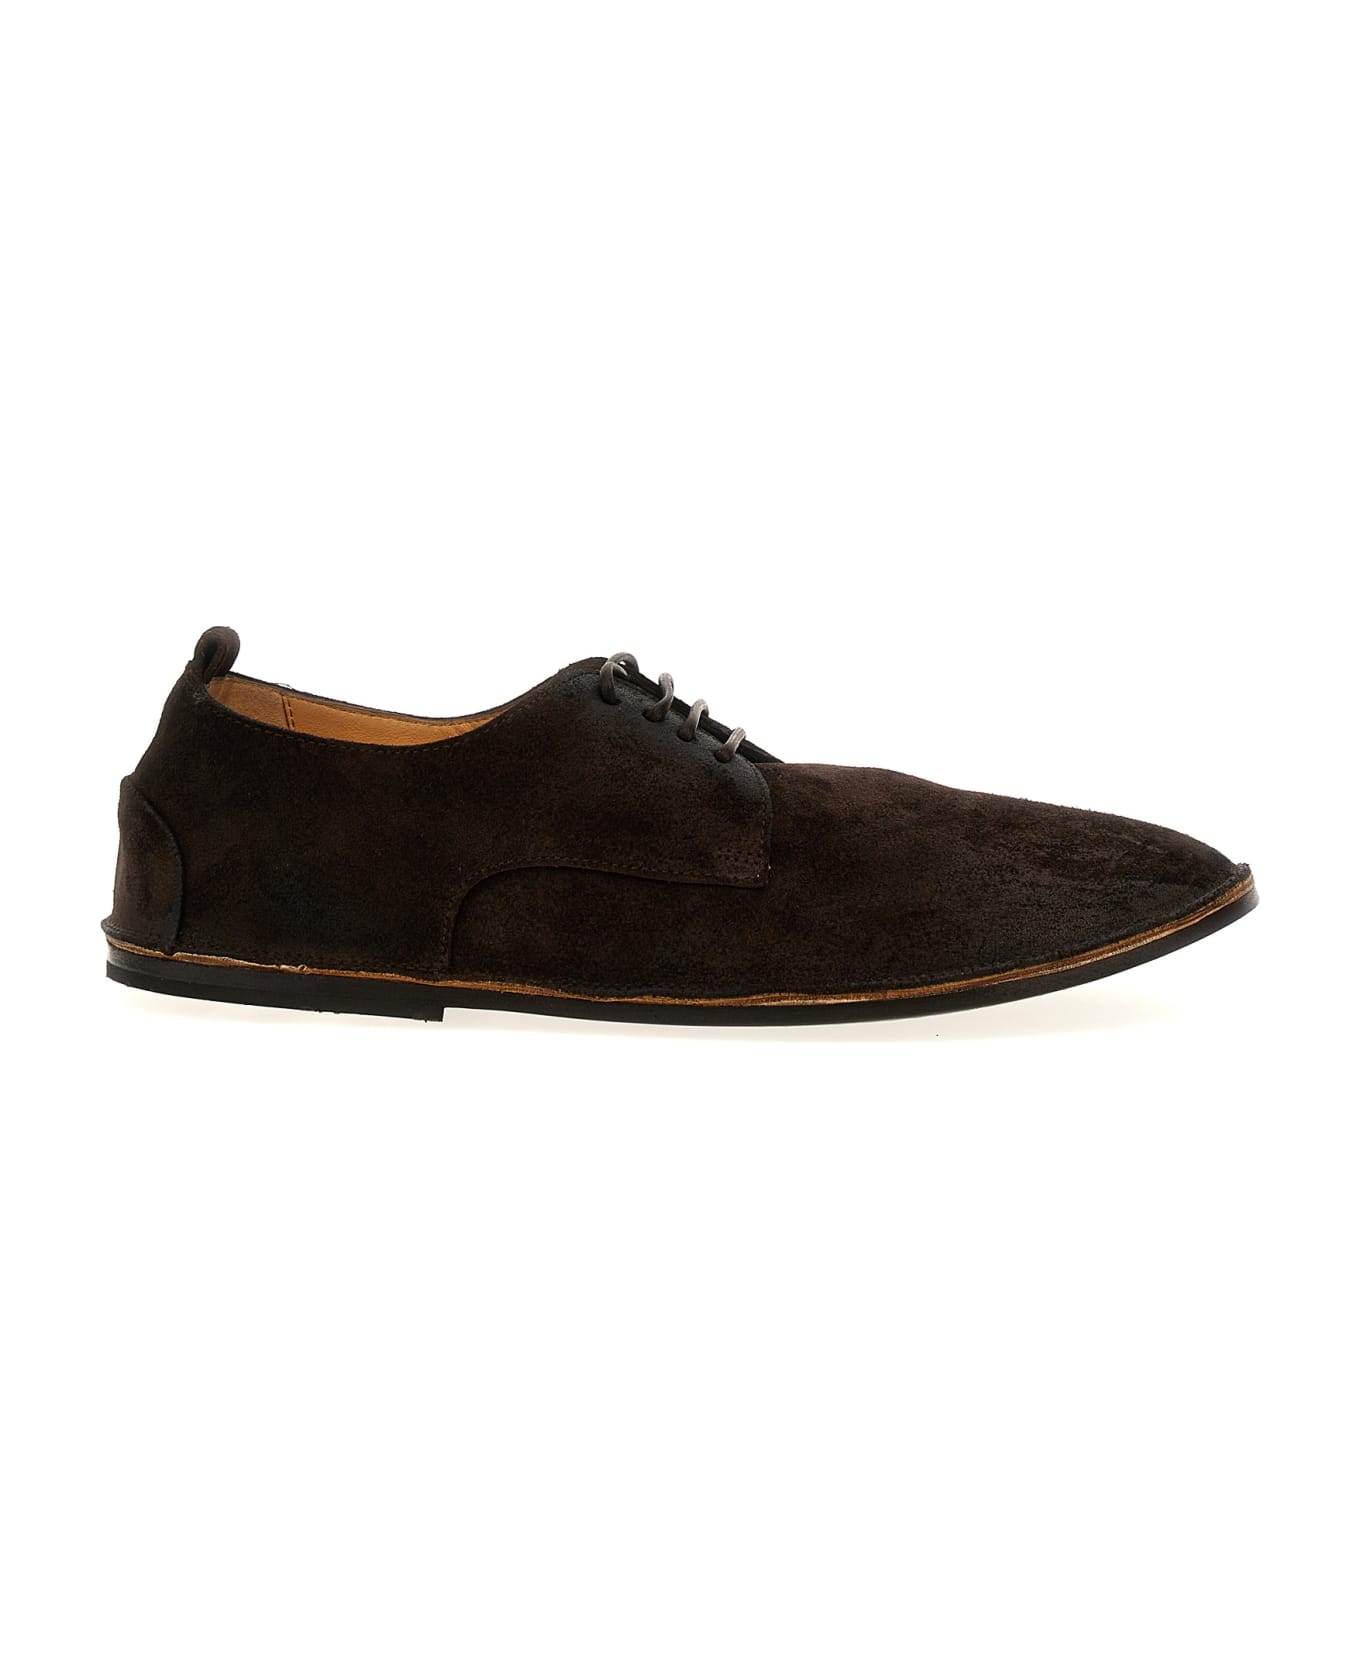 Marsell 'strasacco' Lace Up Shoes - Brown